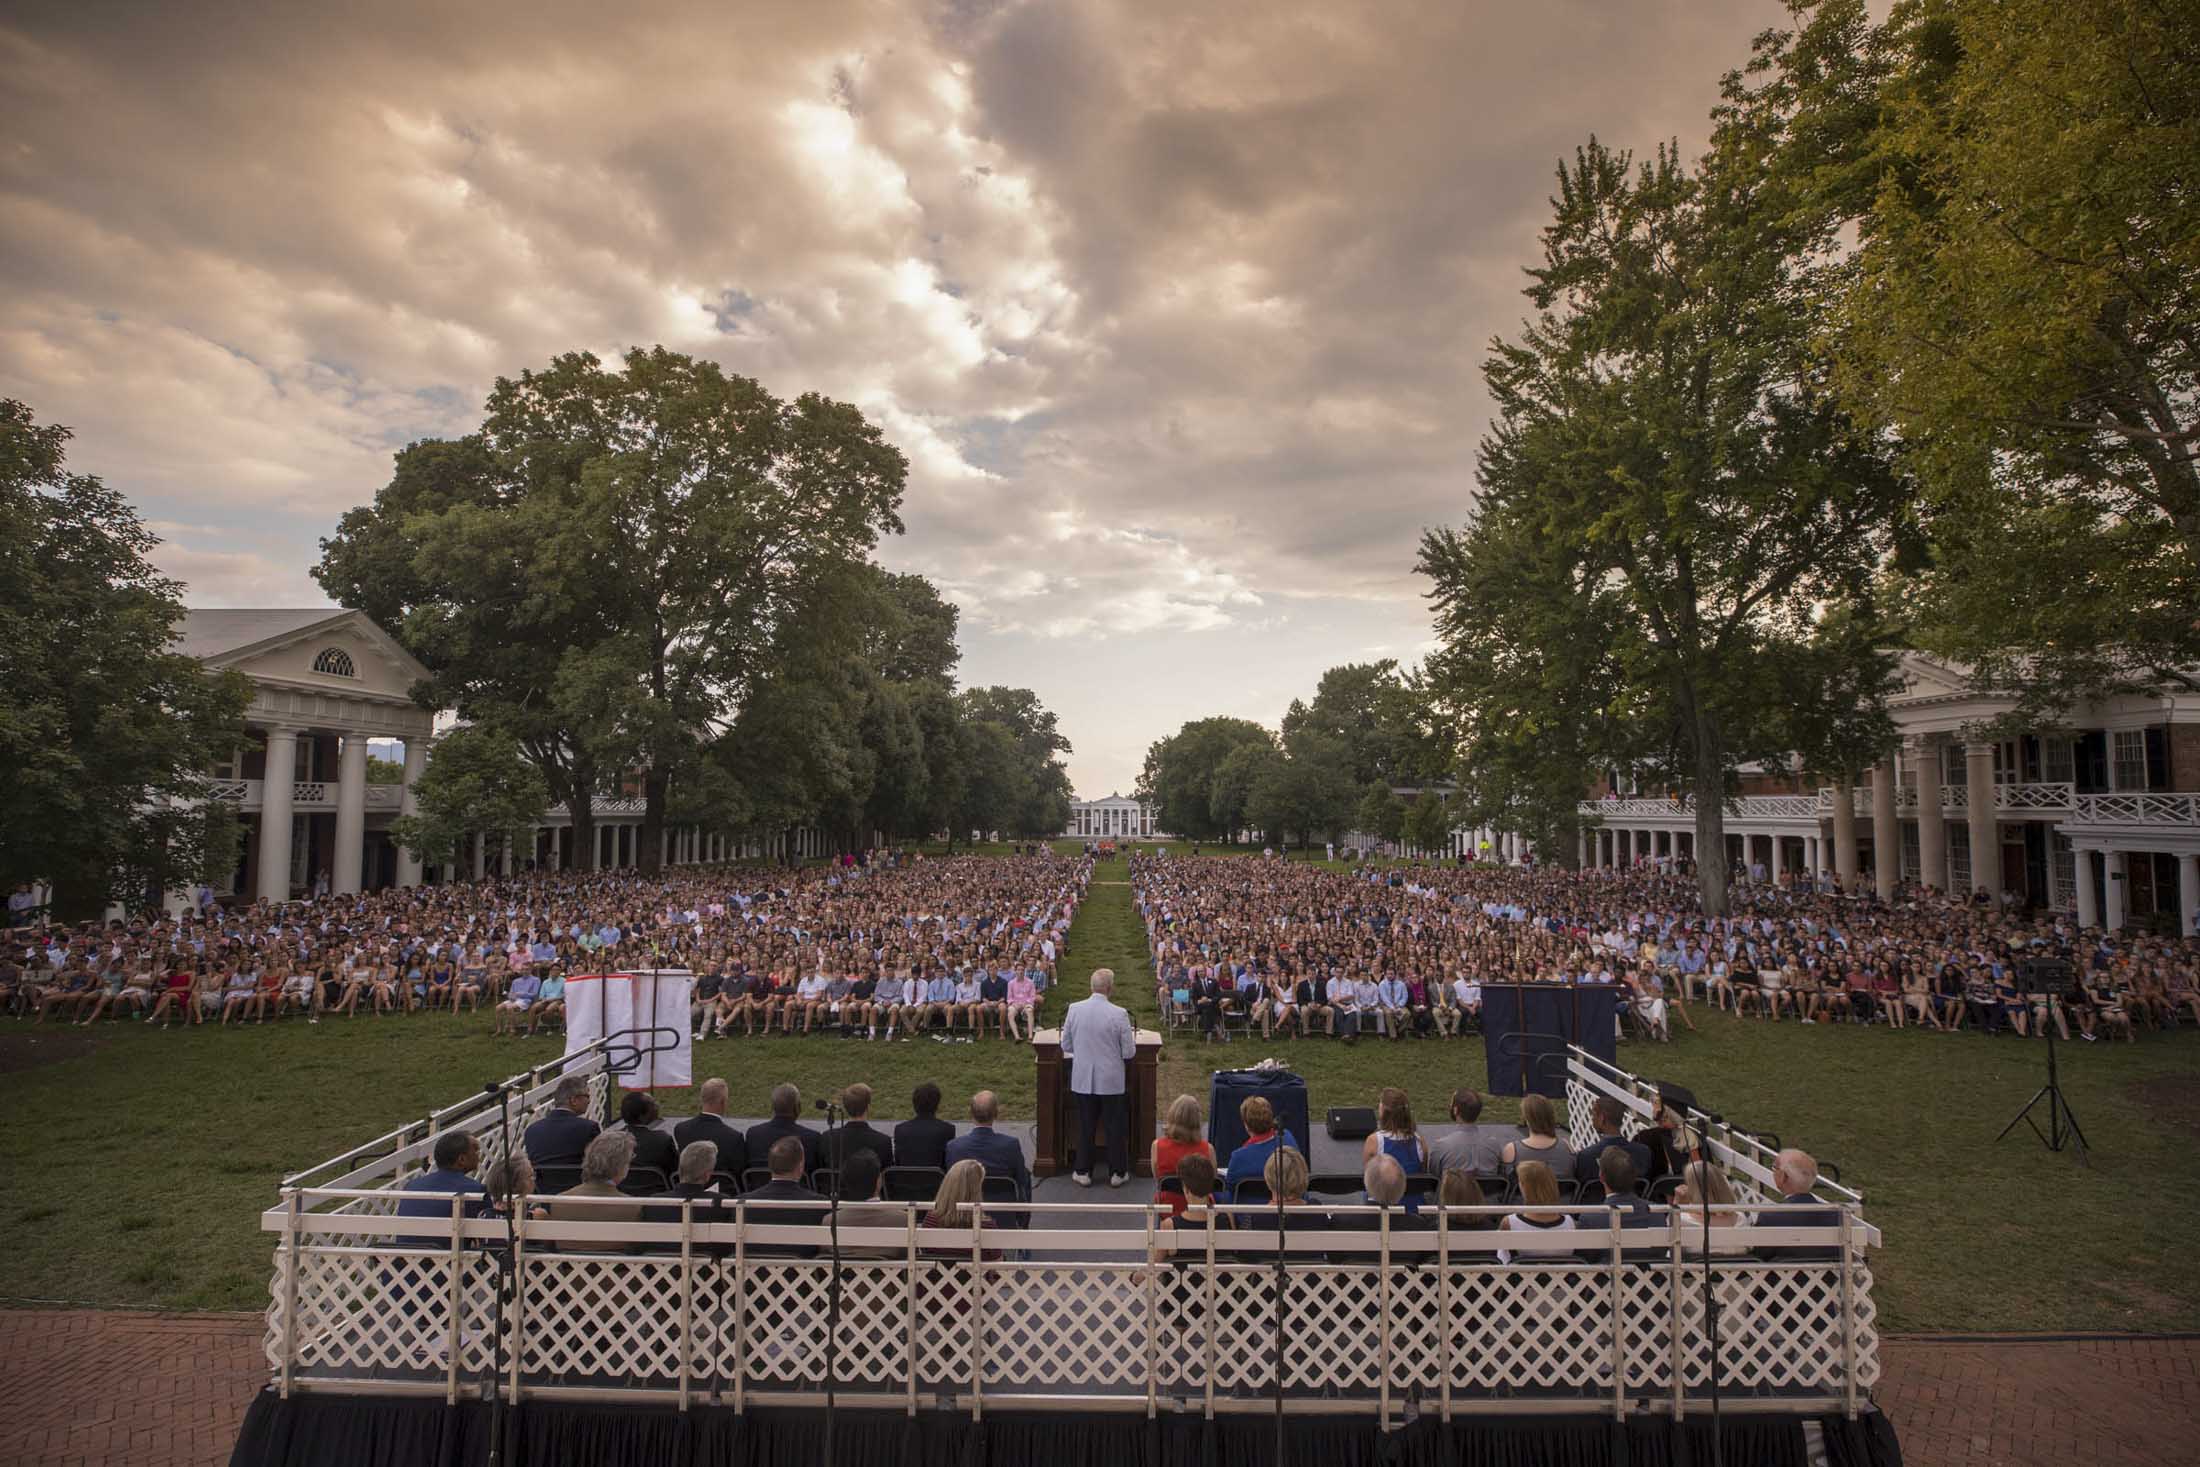 Students sit in chairs on the lawn listening to a convocation speaker